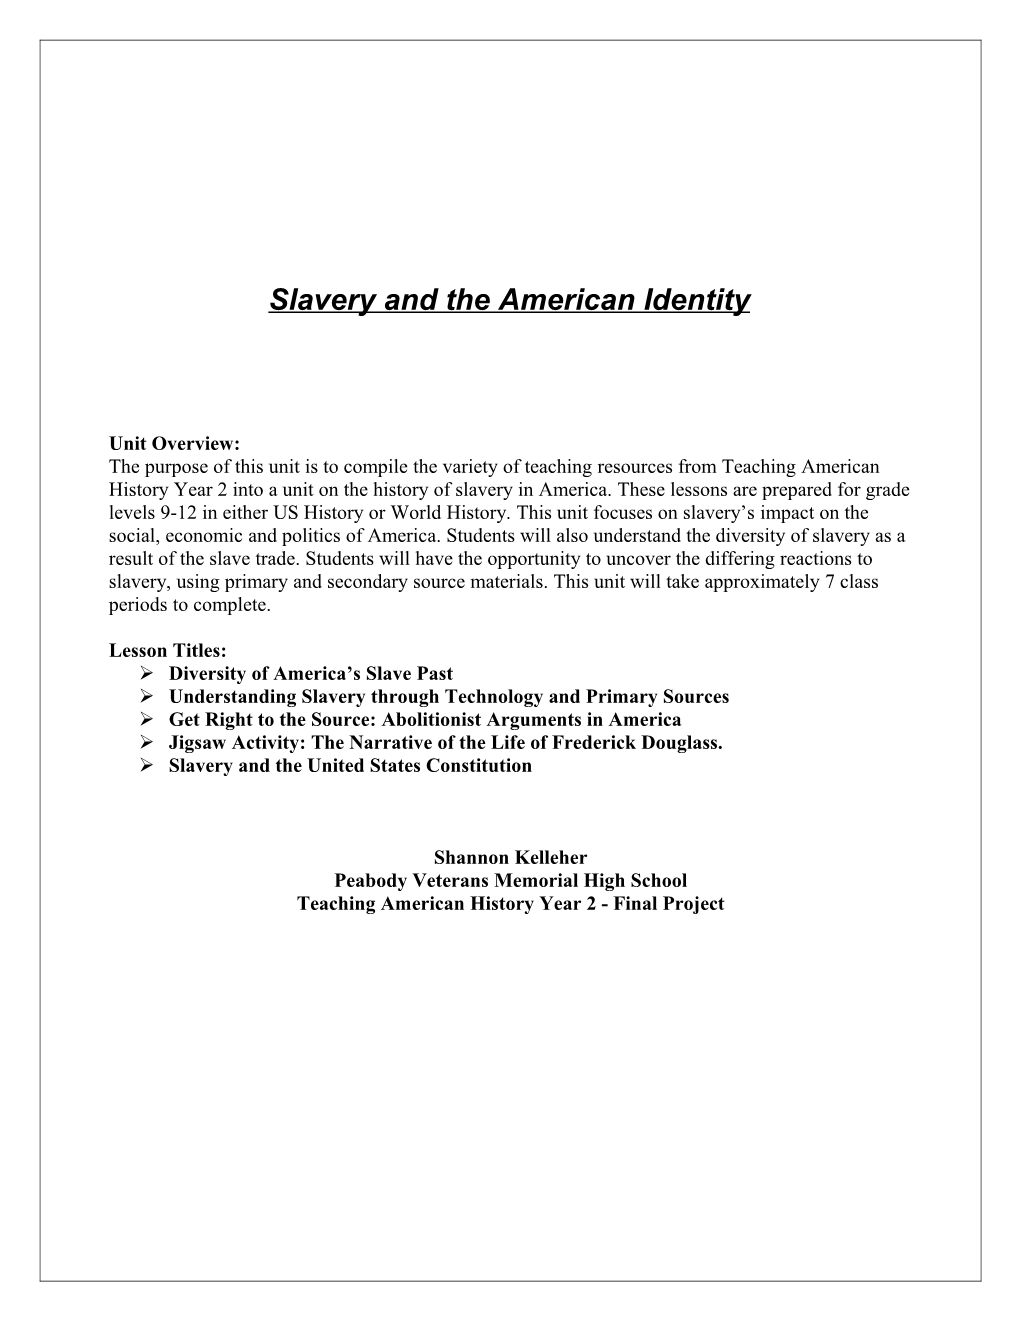 Slavery and the American Identity